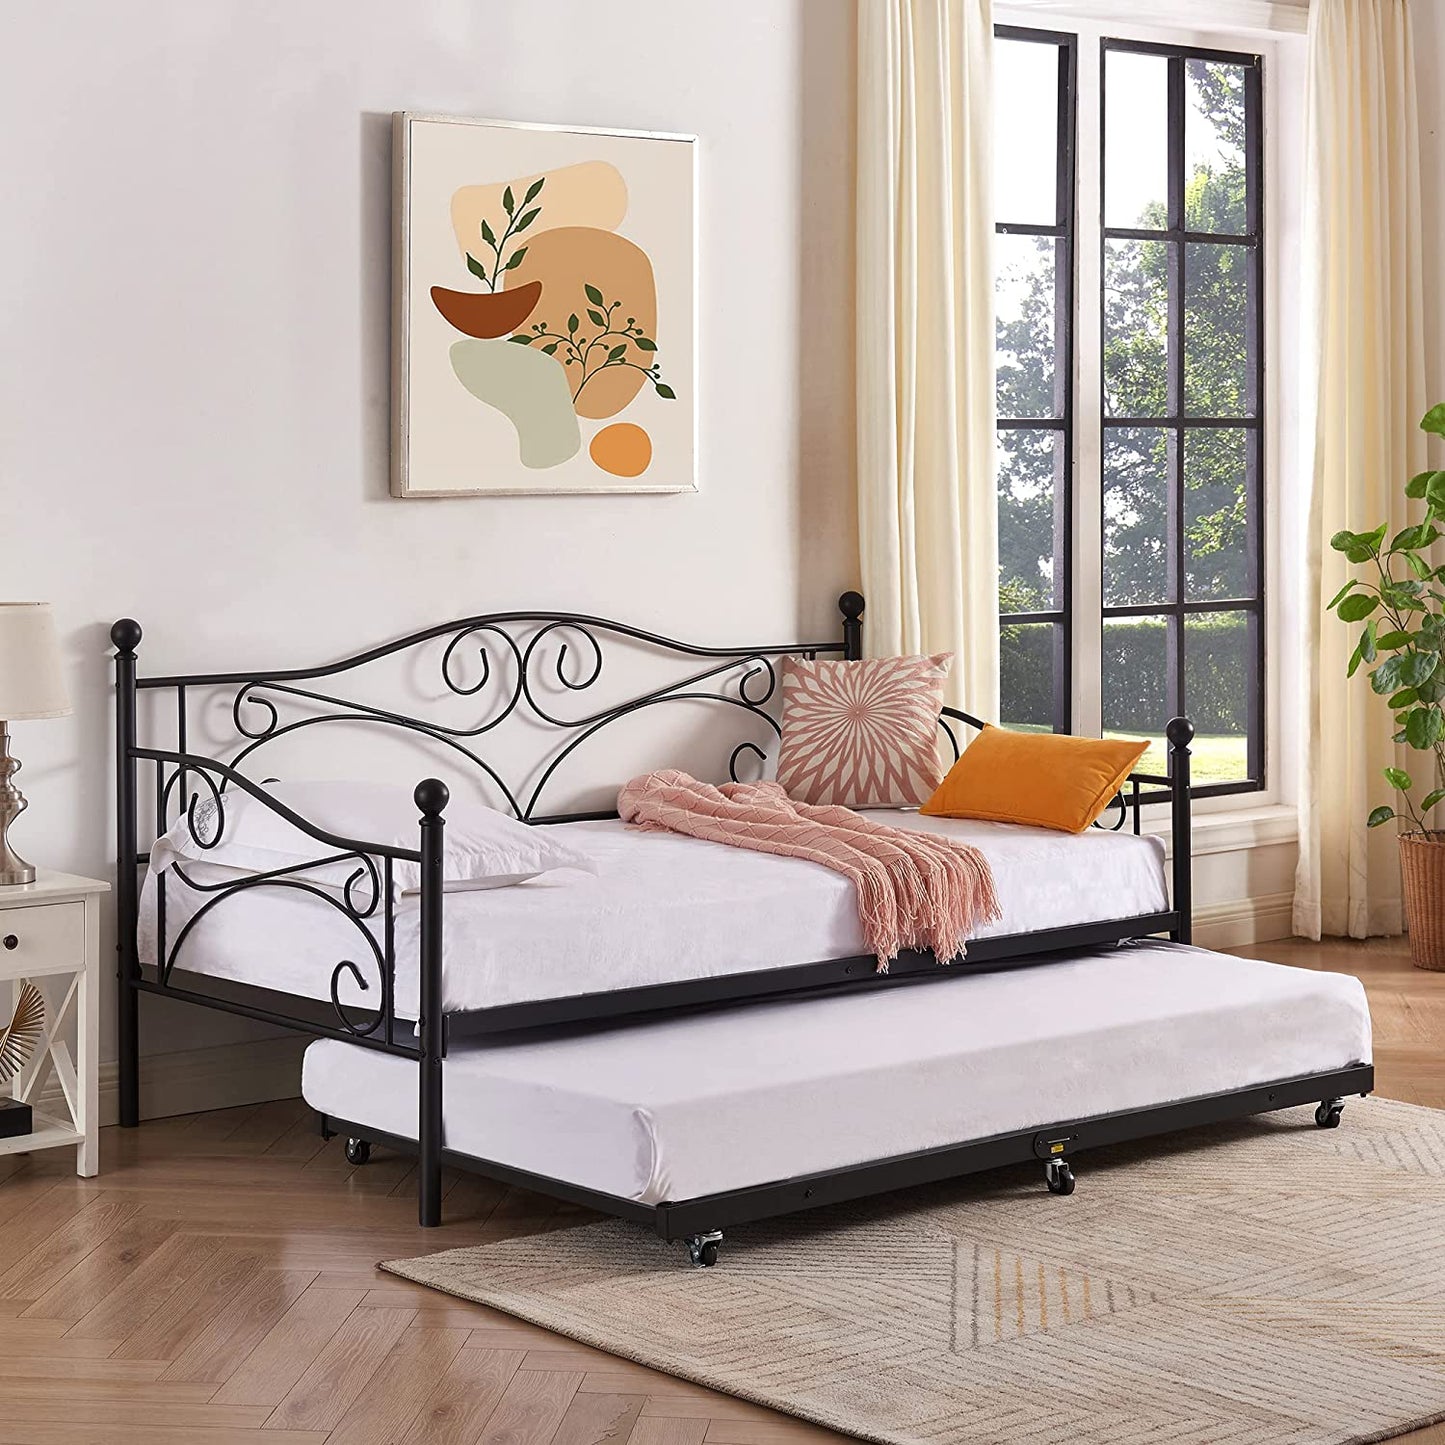 Premium Daybed Metal Bed Frame Twin Size Steel Slat Support, Strong Legs Headboard, Mattress Foundation, Multi-Functional Furniture